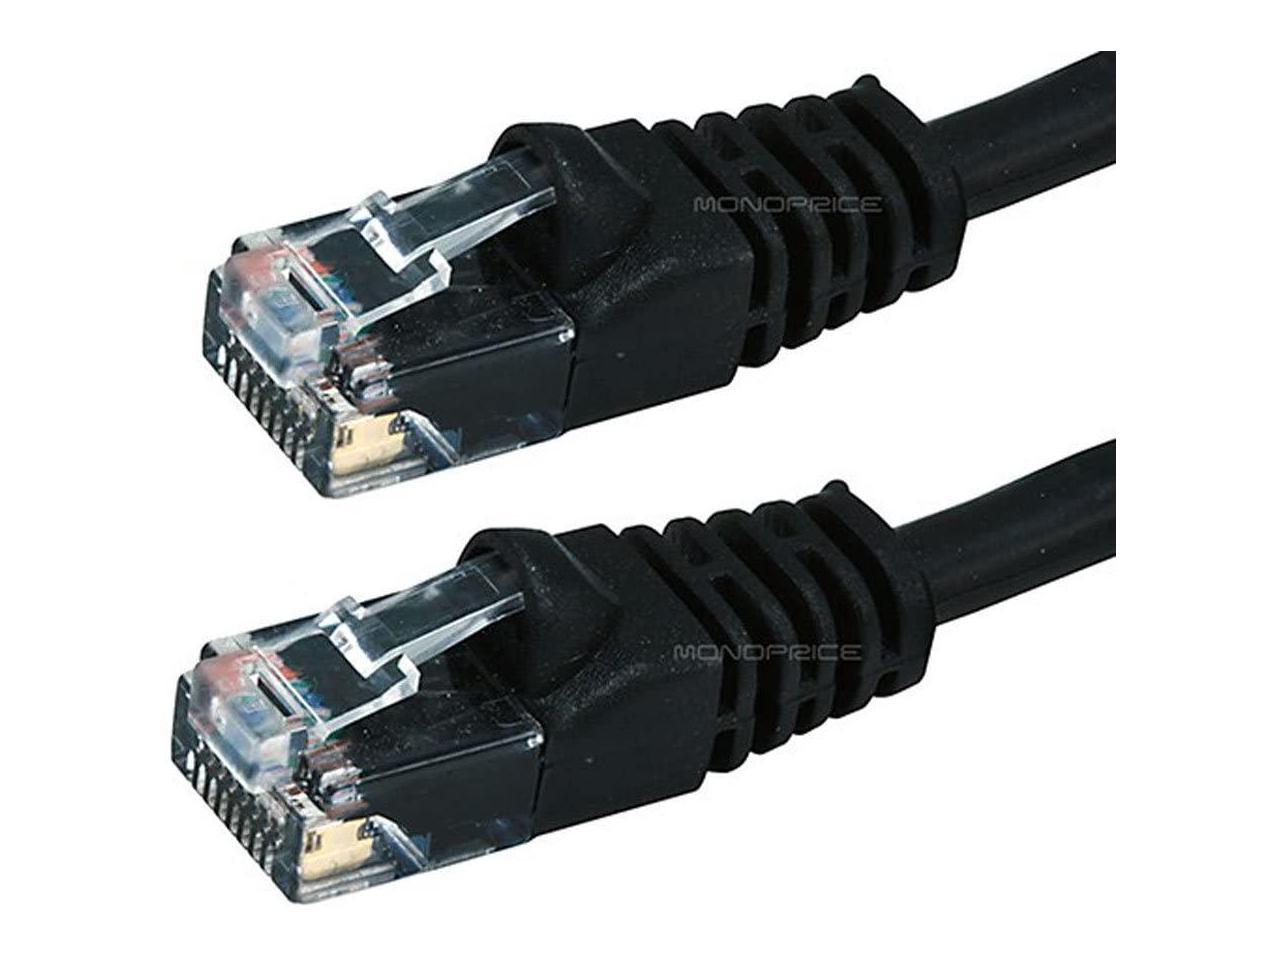 Pure Bare Copper Wire 550Mhz Network Internet Cord RJ45 100ft 24AWG Black Monoprice 102329 Cat6 Ethernet Patch Cable Stranded UTP 